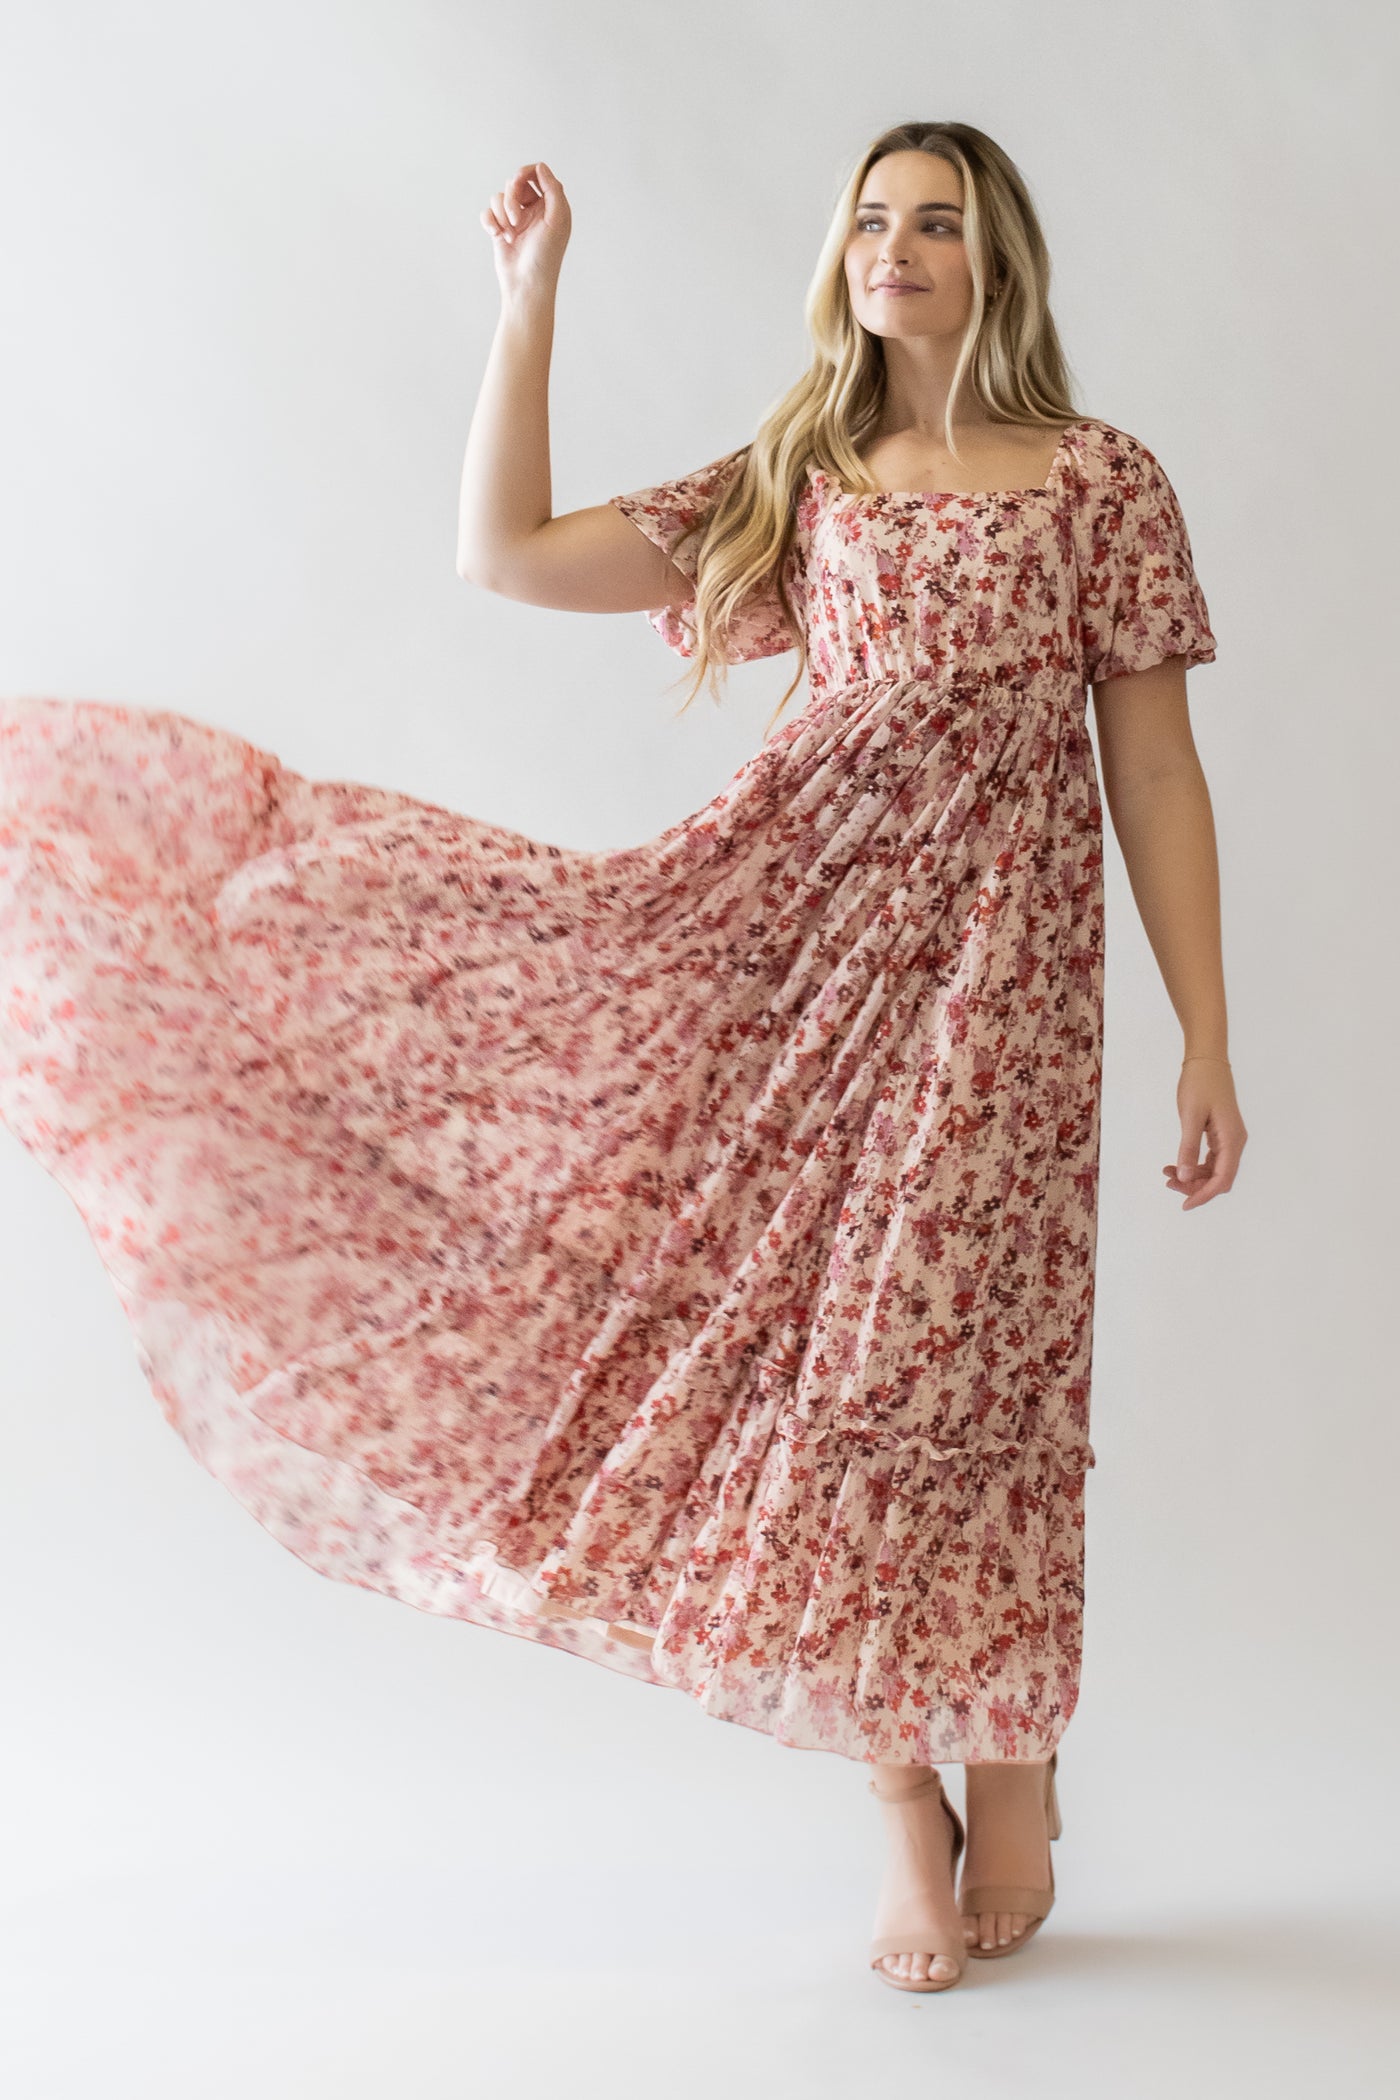 This is a blonde model flinging around her pink floral dress with a square neckline and tiered skirt.